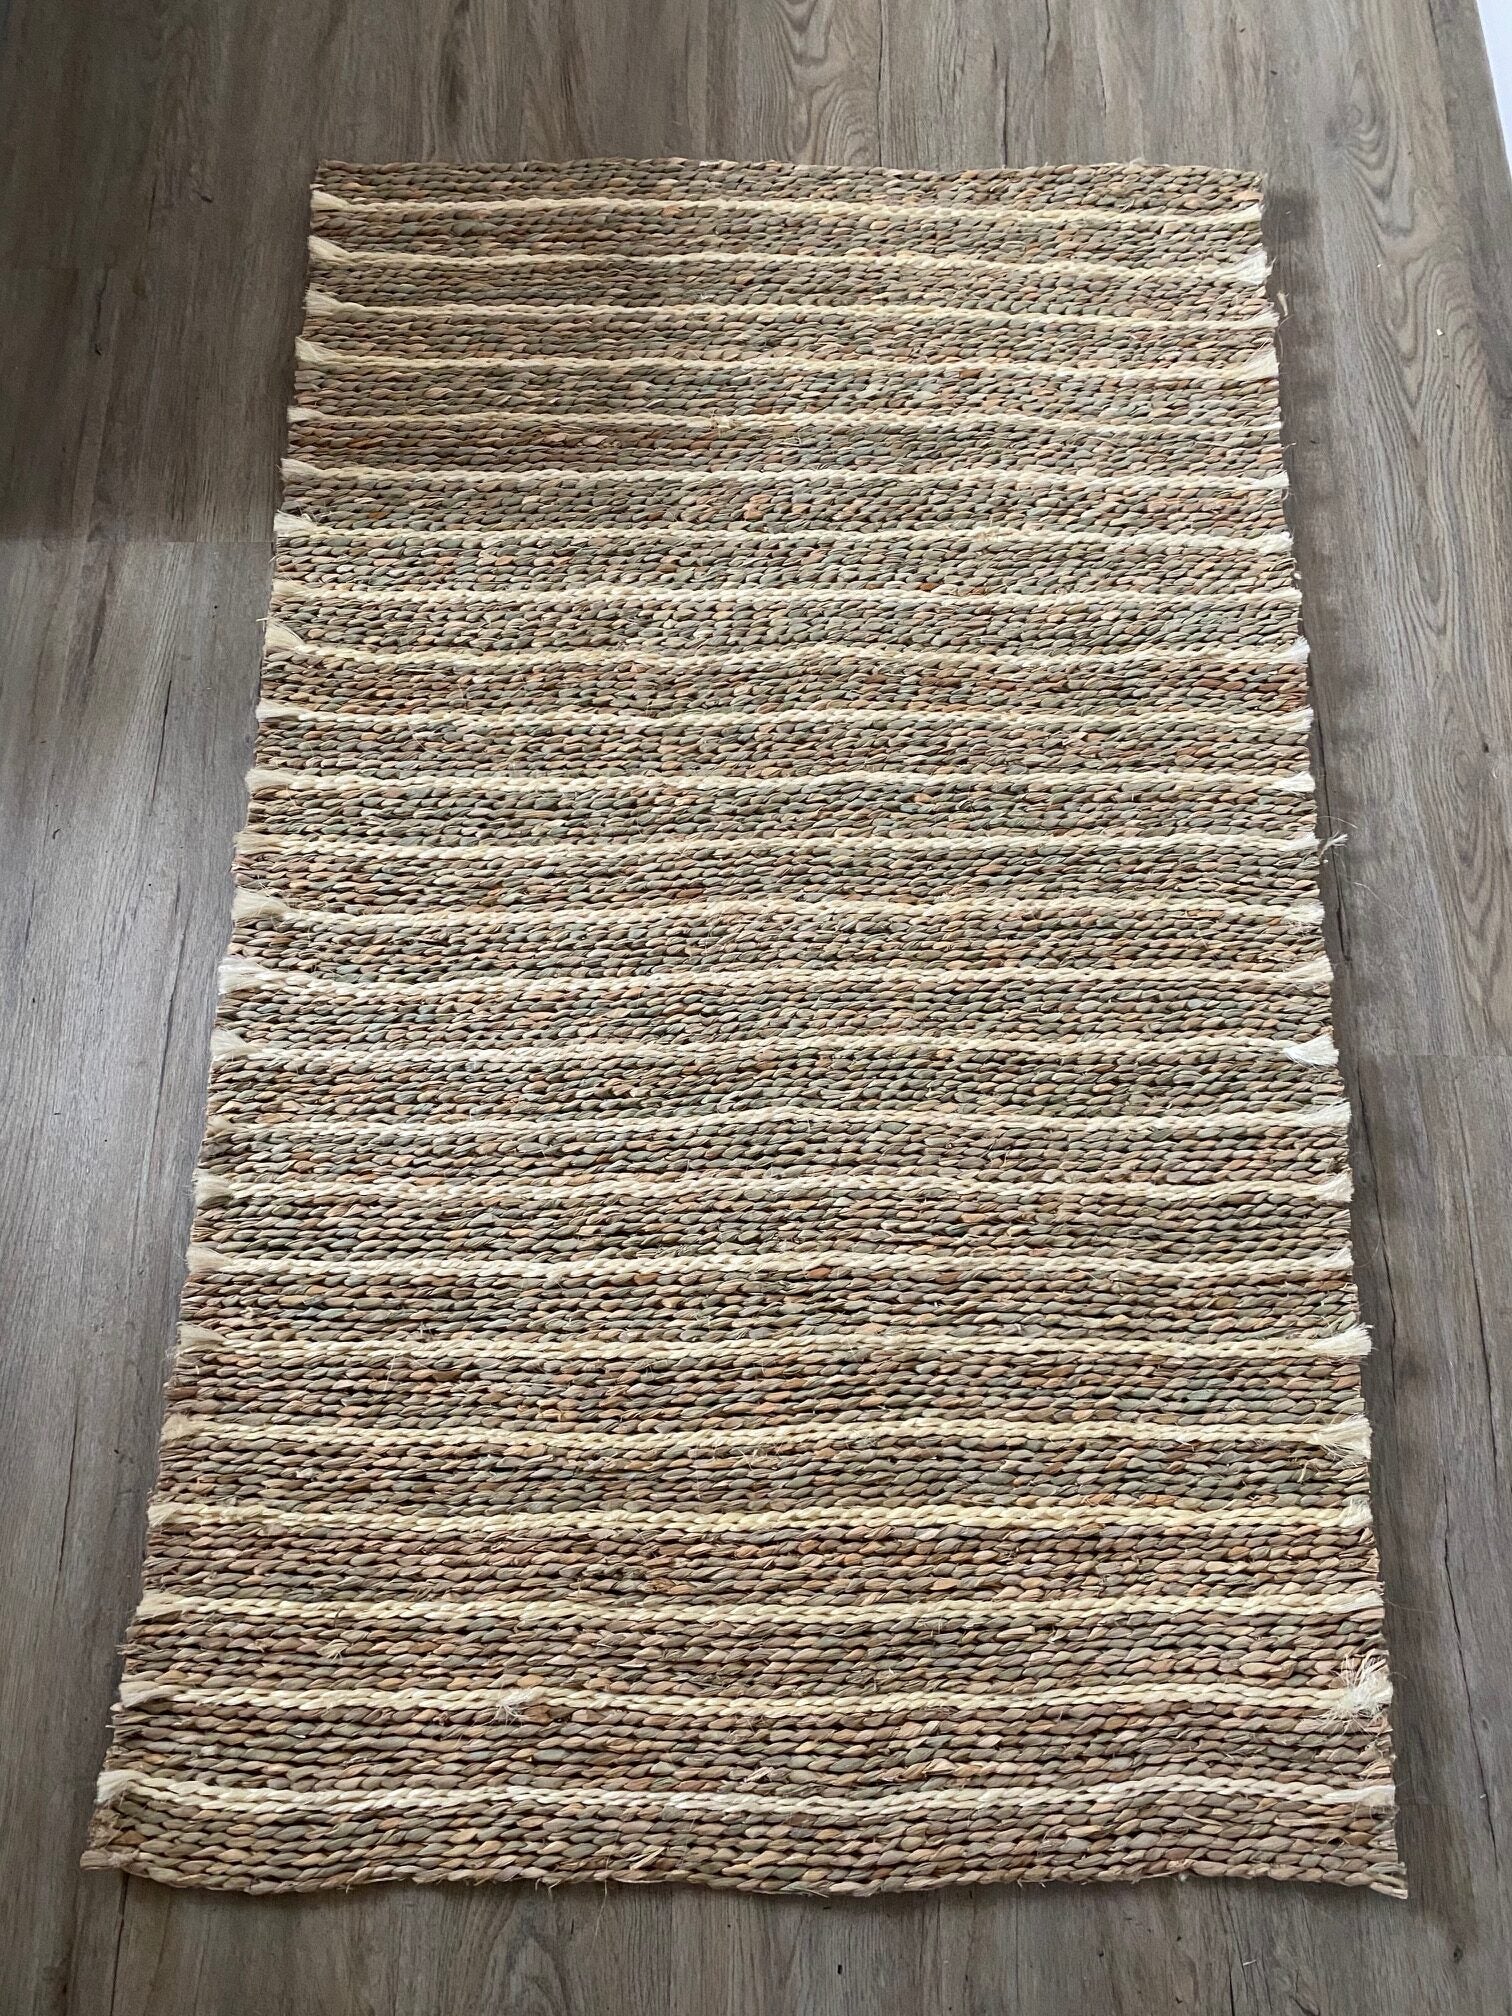 Stripes Seagrass Hall Runner Rug - Large